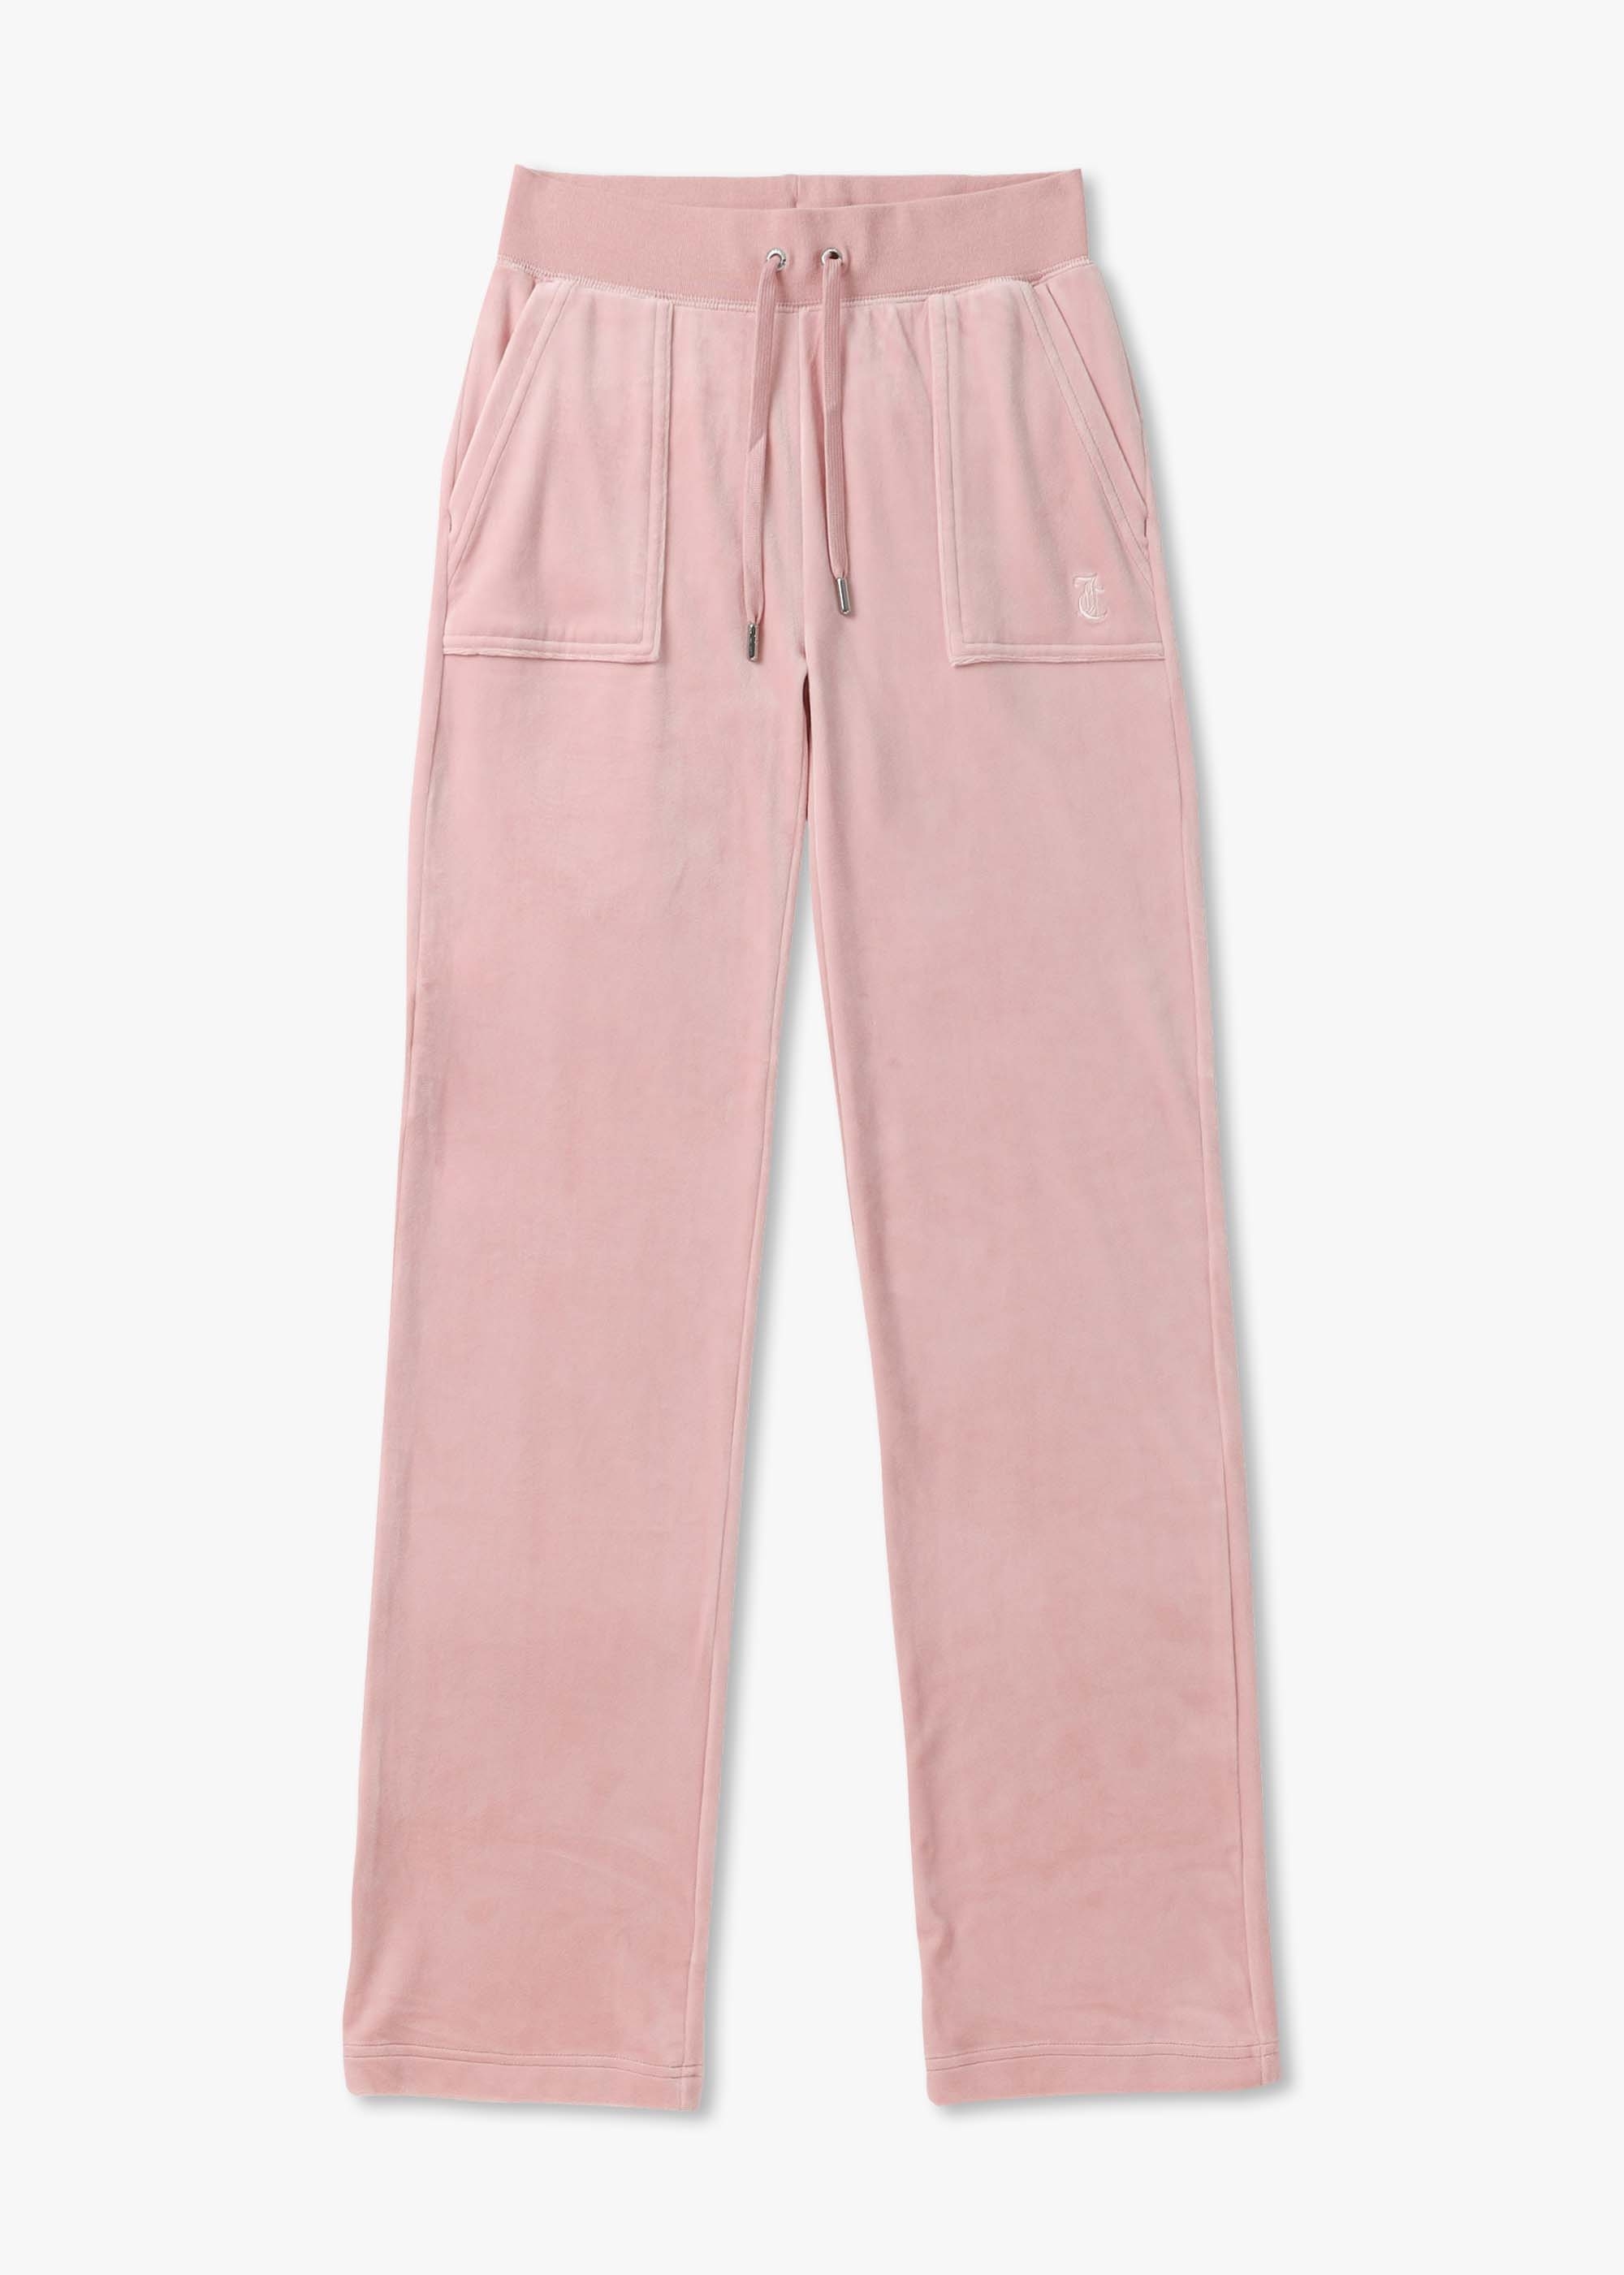 Juicy Couture Womens Del Ray Classic Pocket Lounge Pants In Light Pink